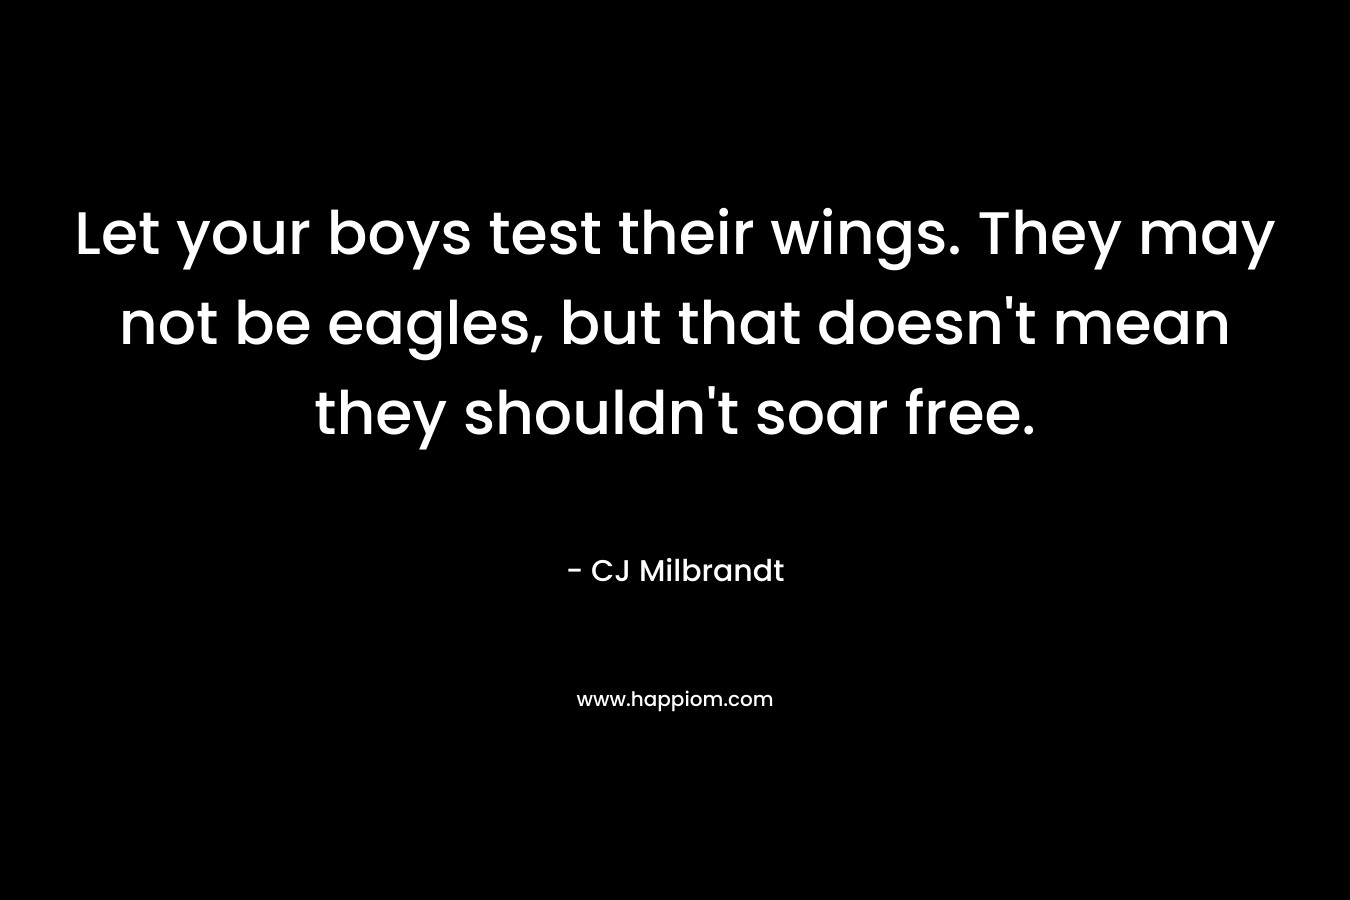 Let your boys test their wings. They may not be eagles, but that doesn't mean they shouldn't soar free.